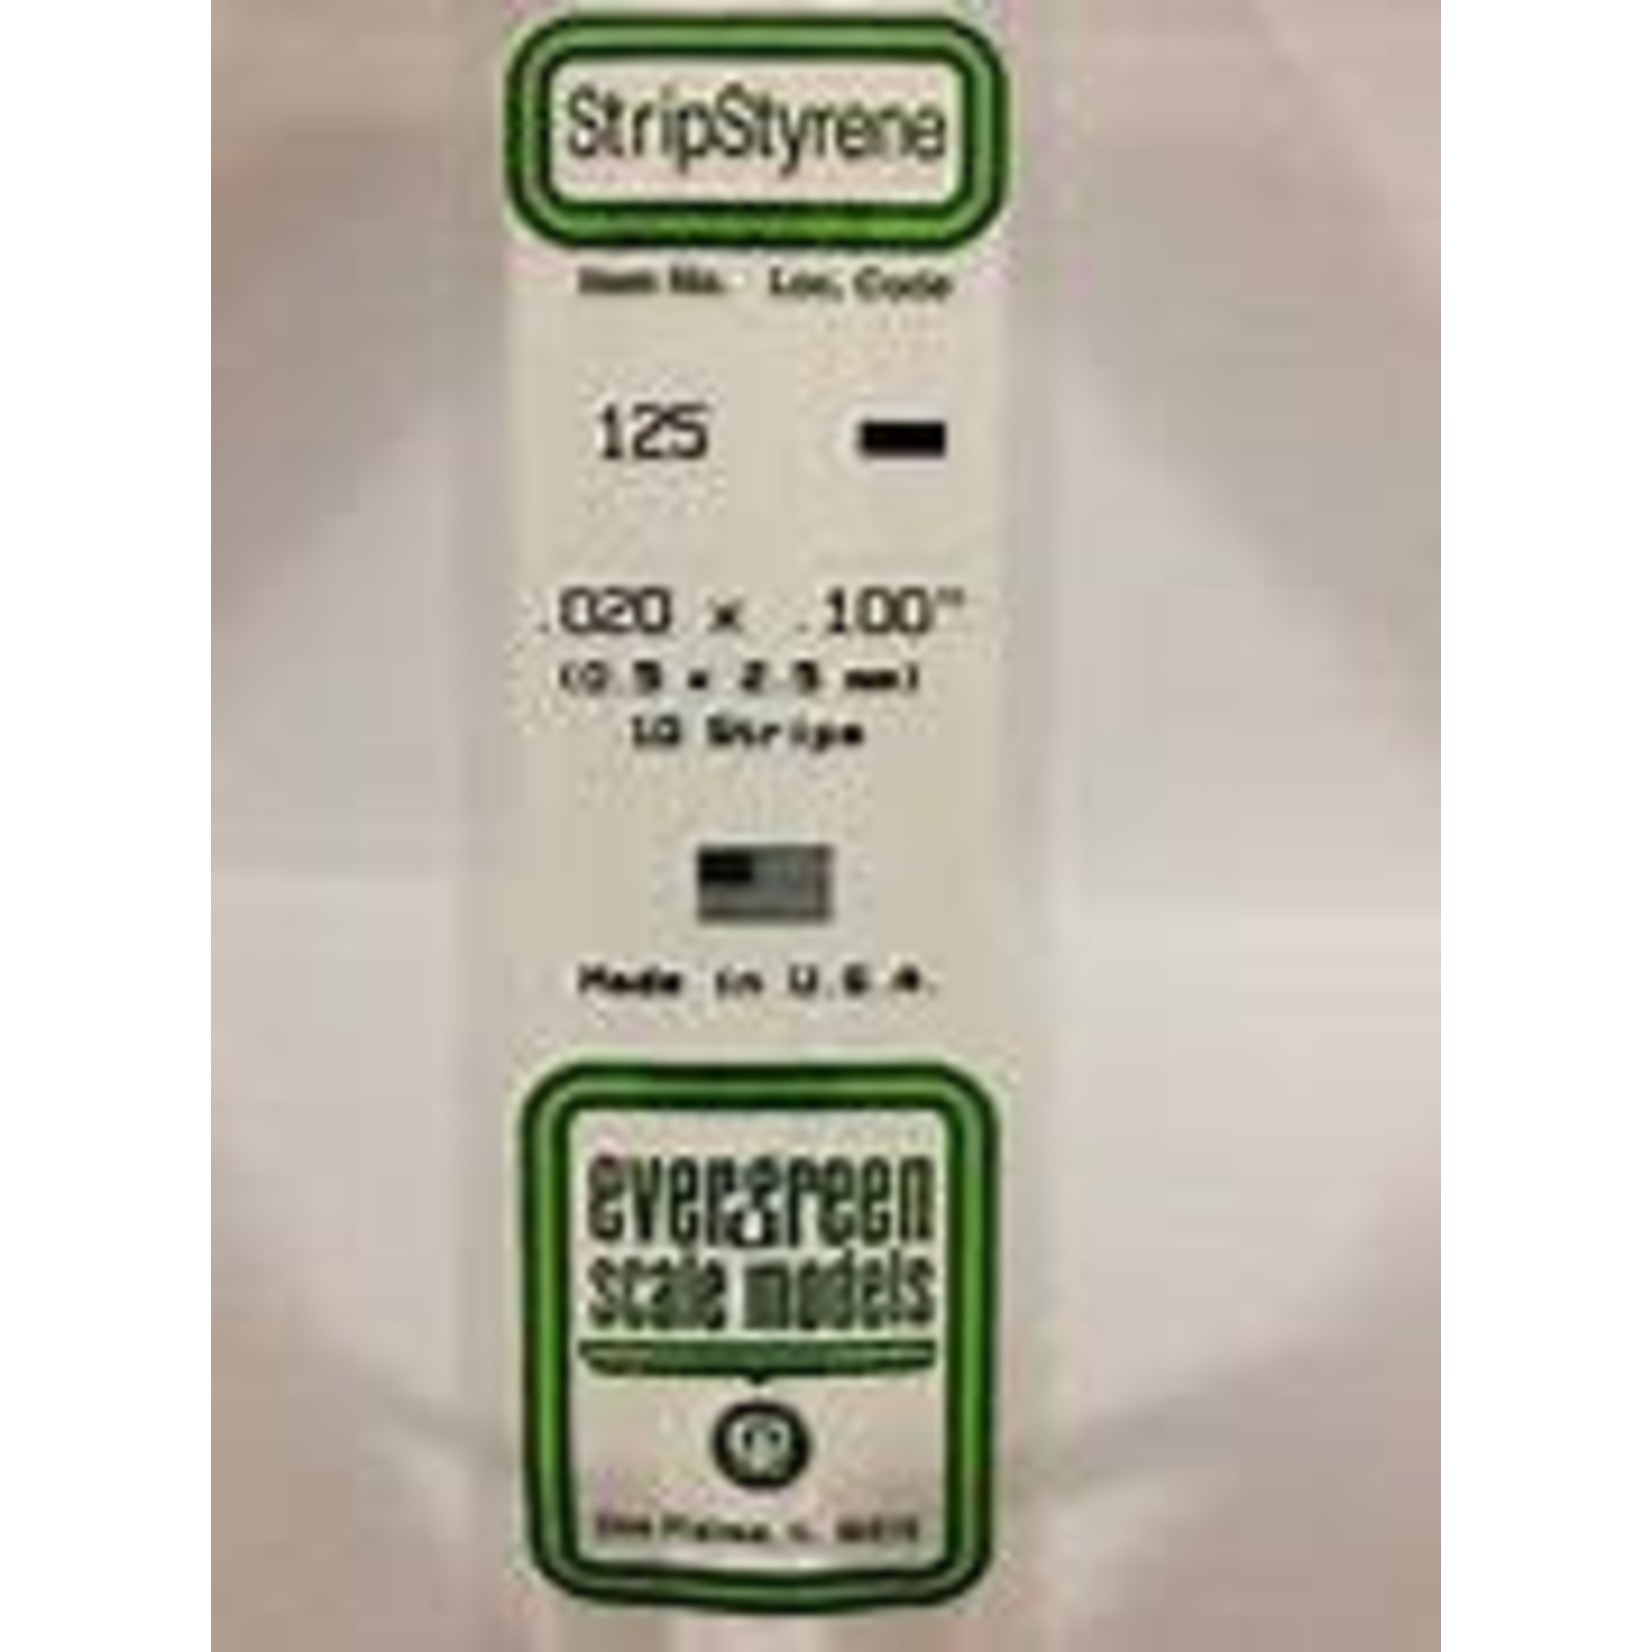 Evergreen Scale Models Evergreen 125 - .020" X .100" OPAQUE WHITE POLYSTYRENE STRIP #125